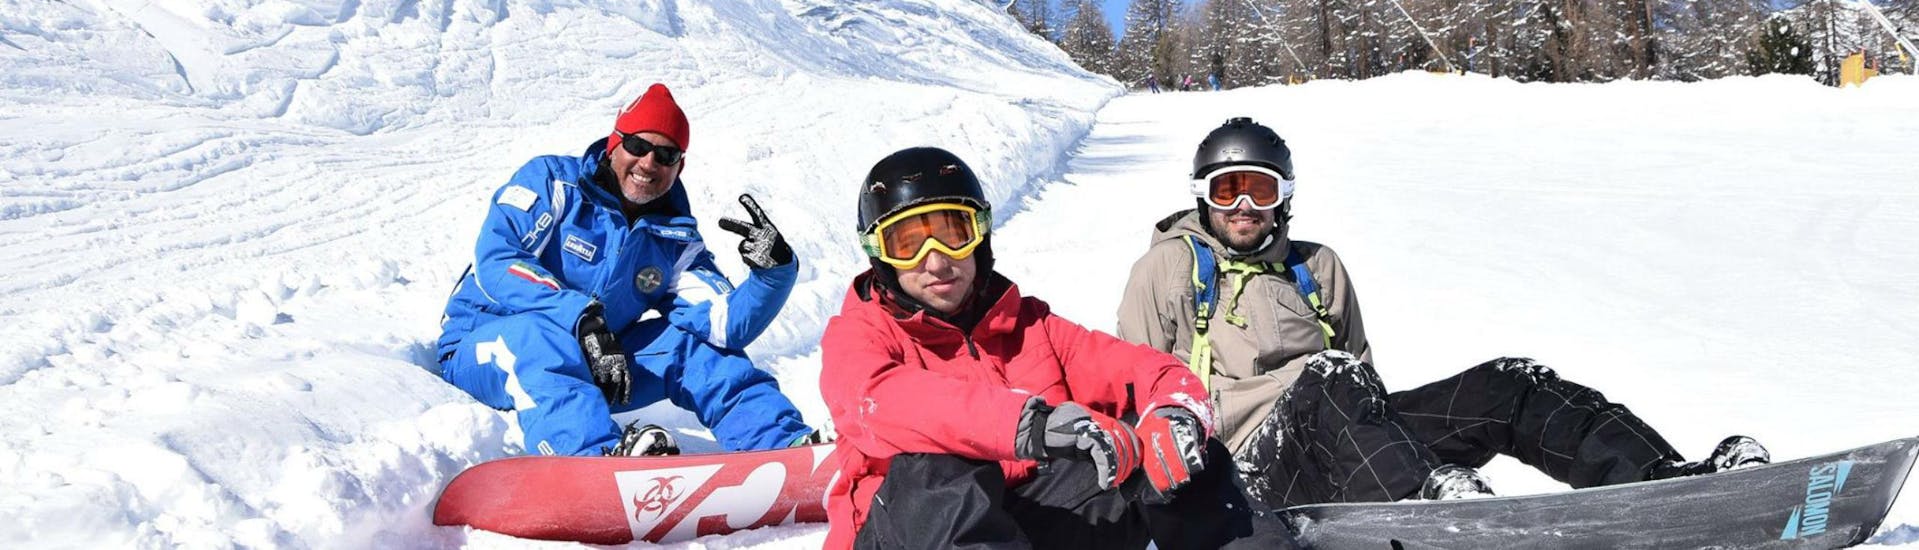 Two snowboarders and their instructor are taking a short break from their Snowboarding Lessons for Kids & Adults - All Levels organised by the ski school Scuola di Sci e Snowboard Livigno Italy.